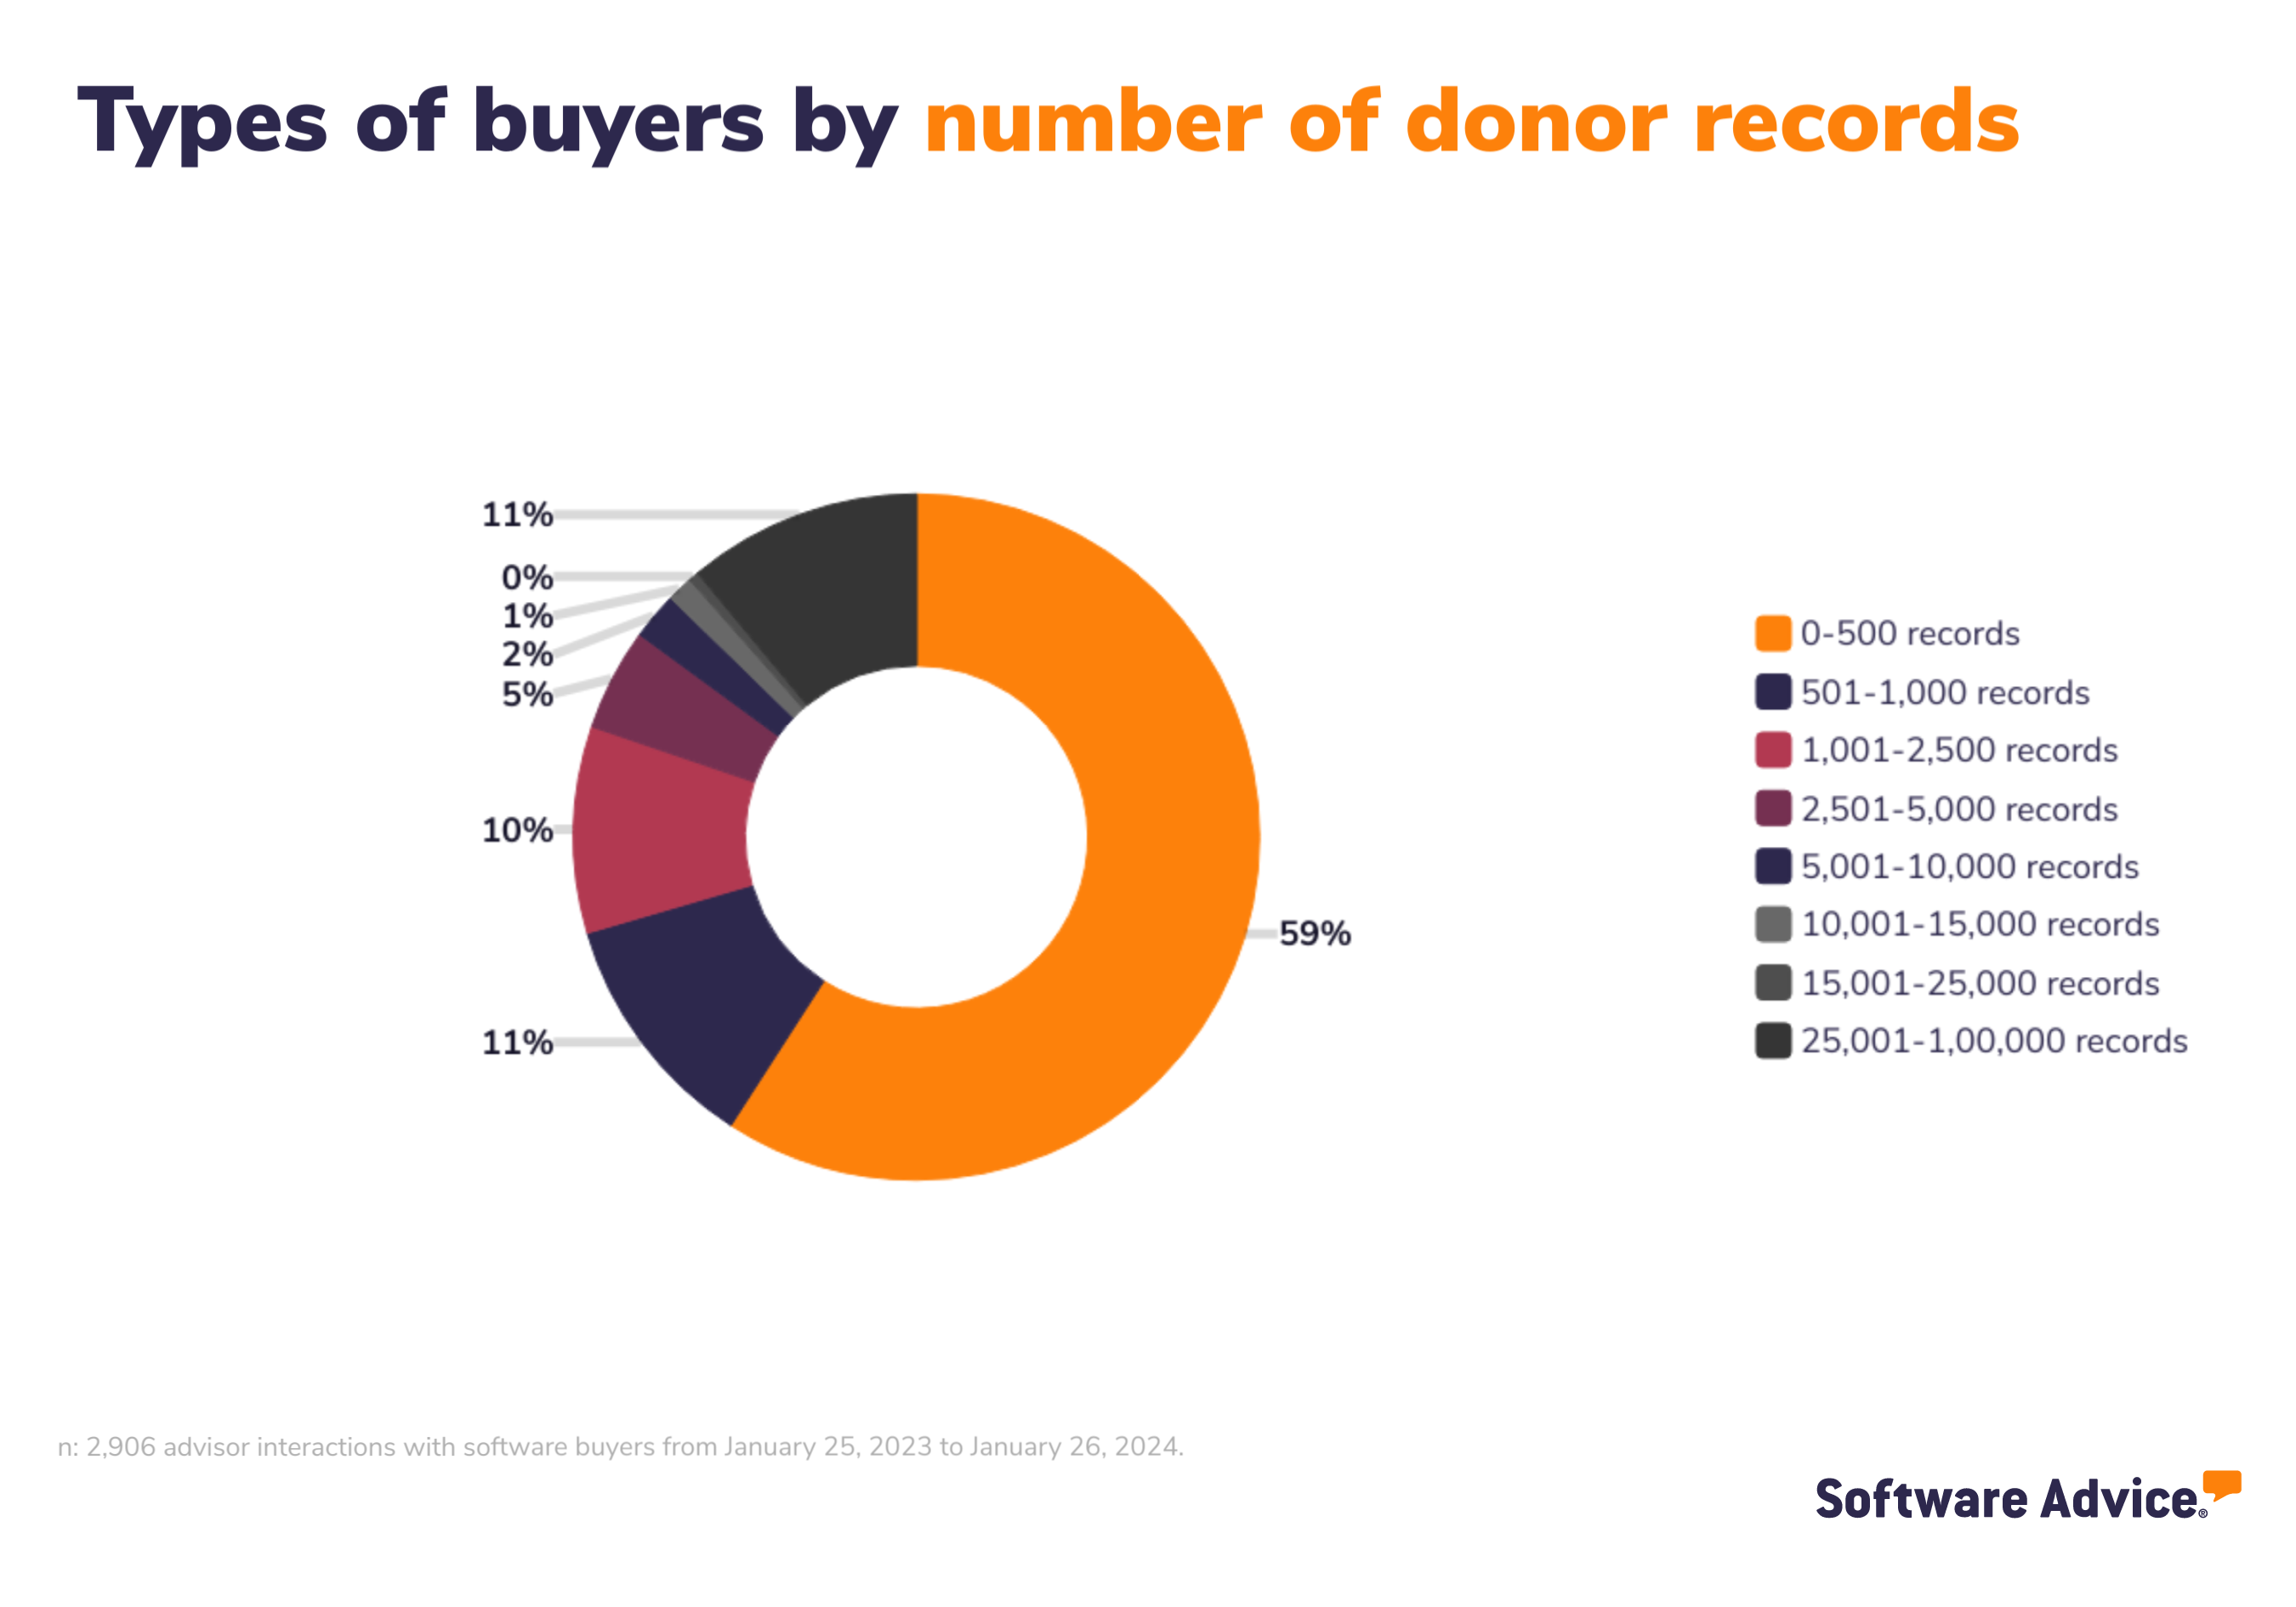 Software Advice graphic: Types of buyers by number of donor records